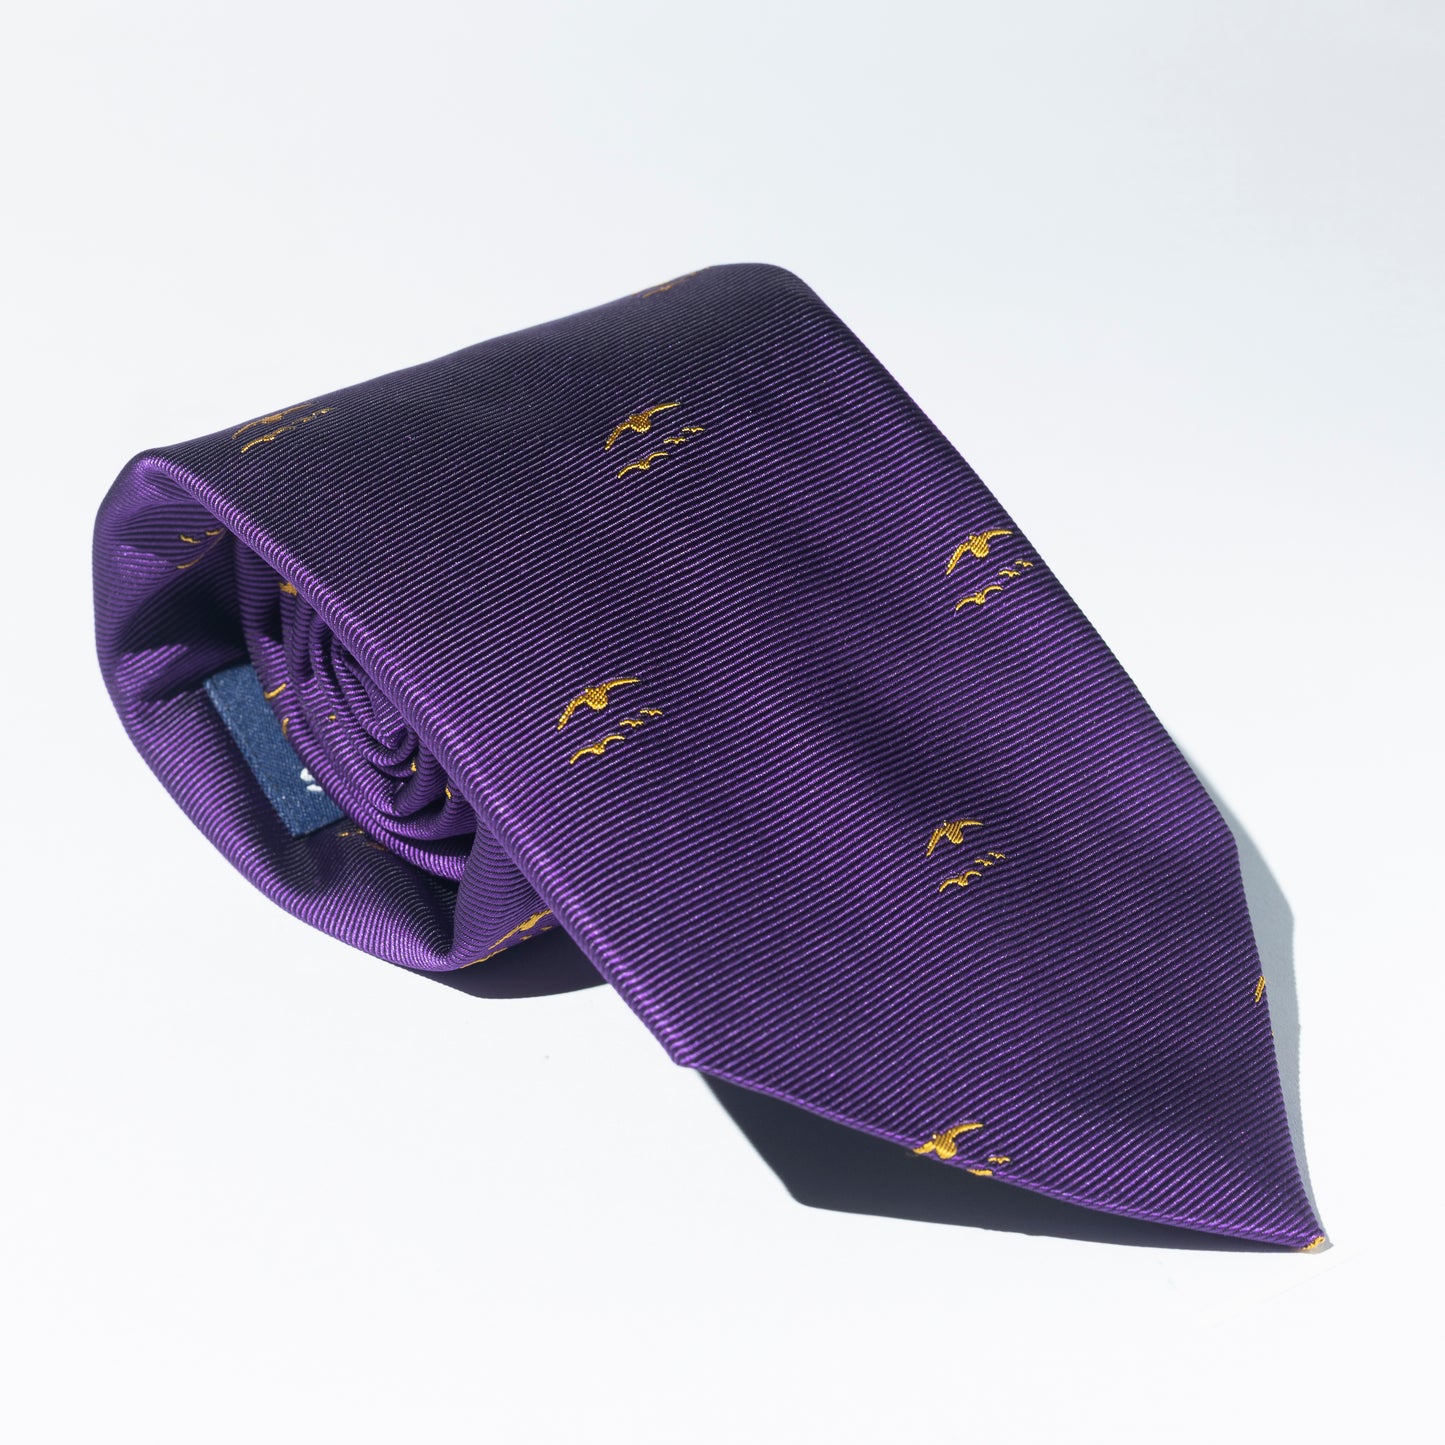 GWCT Tie - Grouse Covey Motif